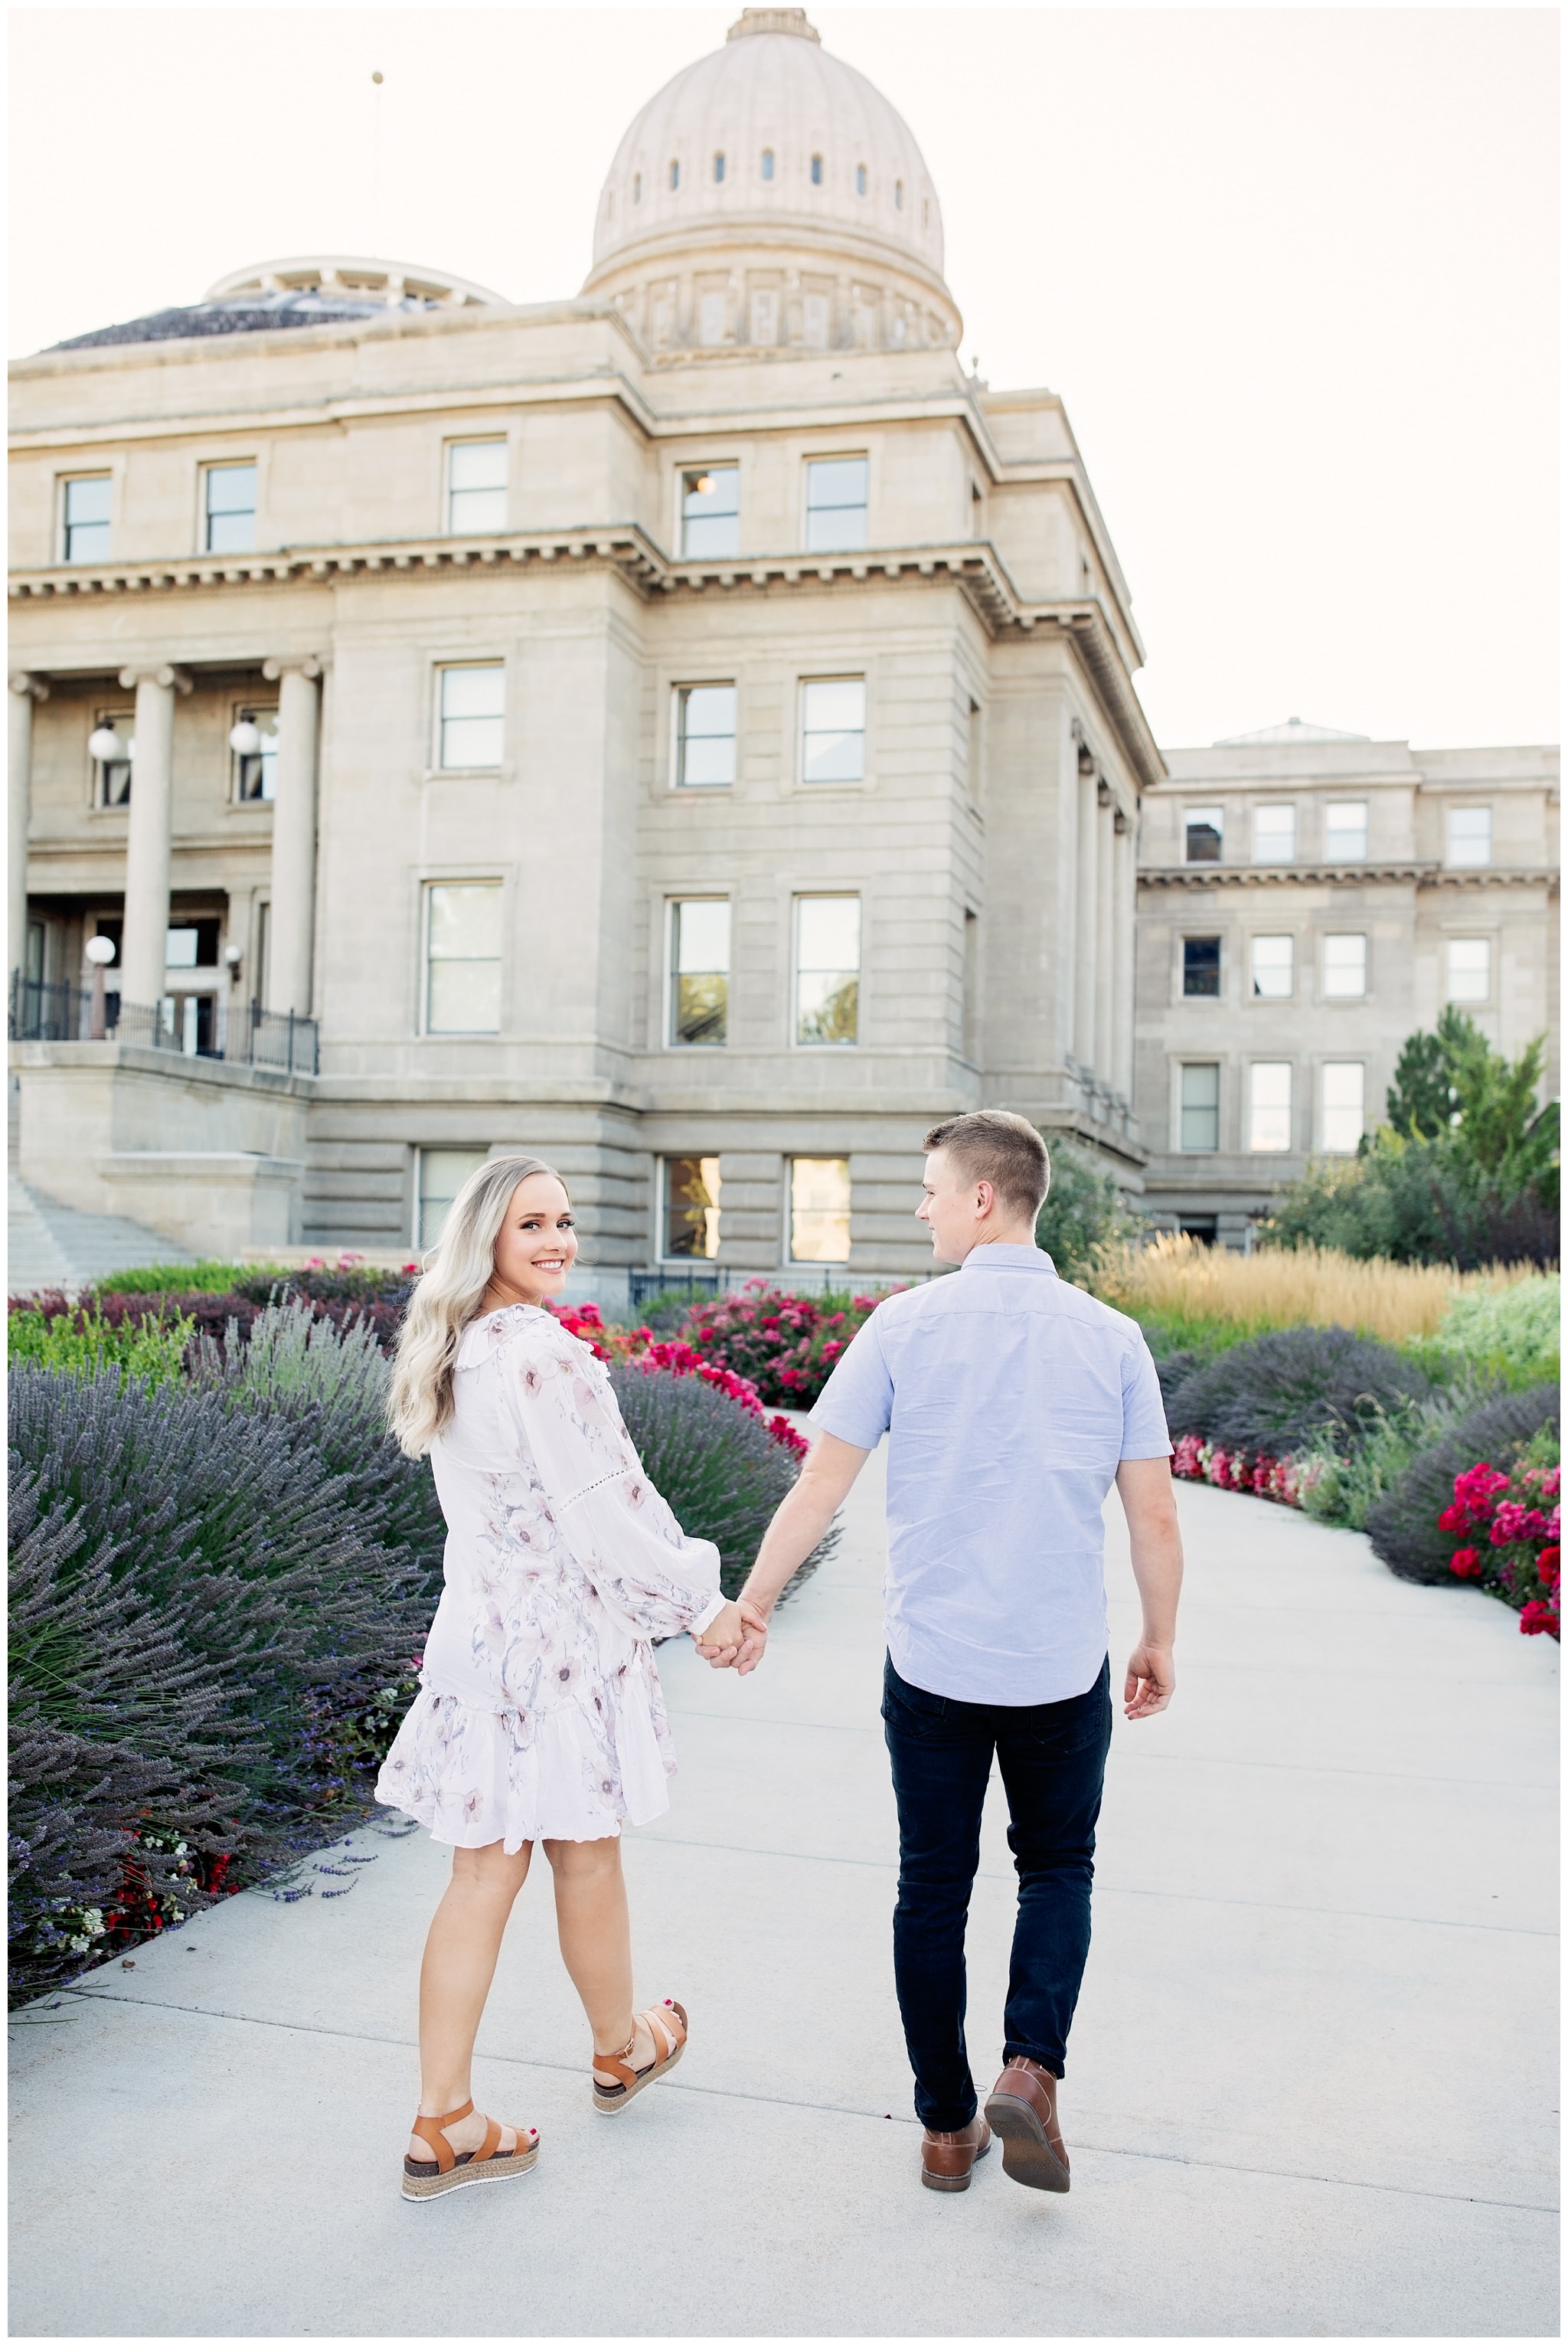 Engagement photos at the Boise capitol